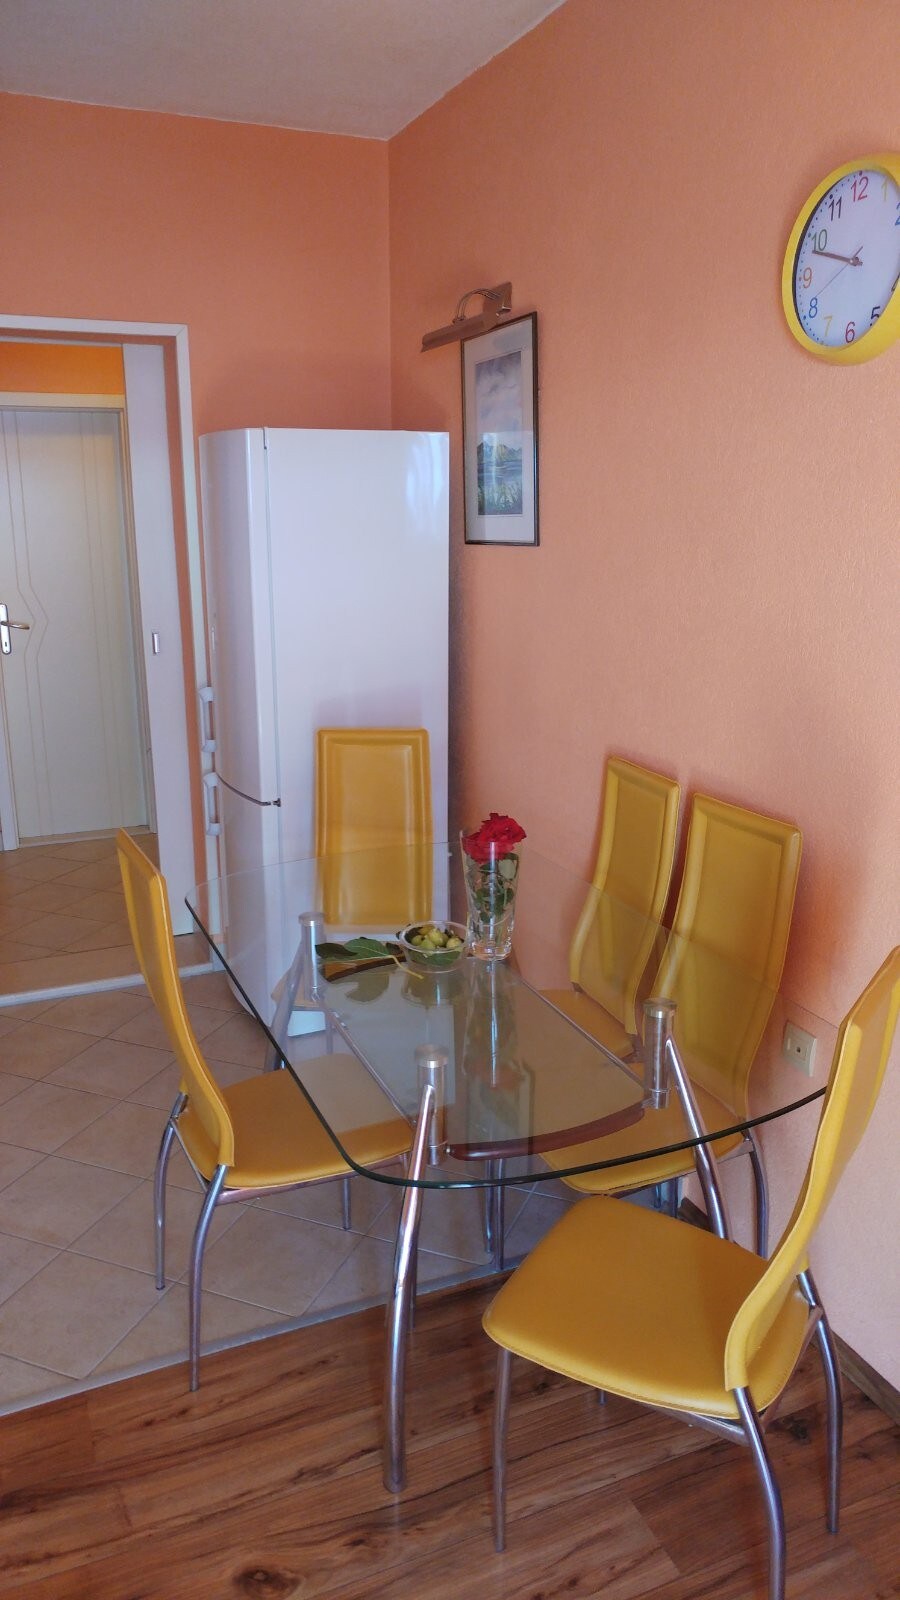 A-15443-b Two bedroom apartment with balcony and